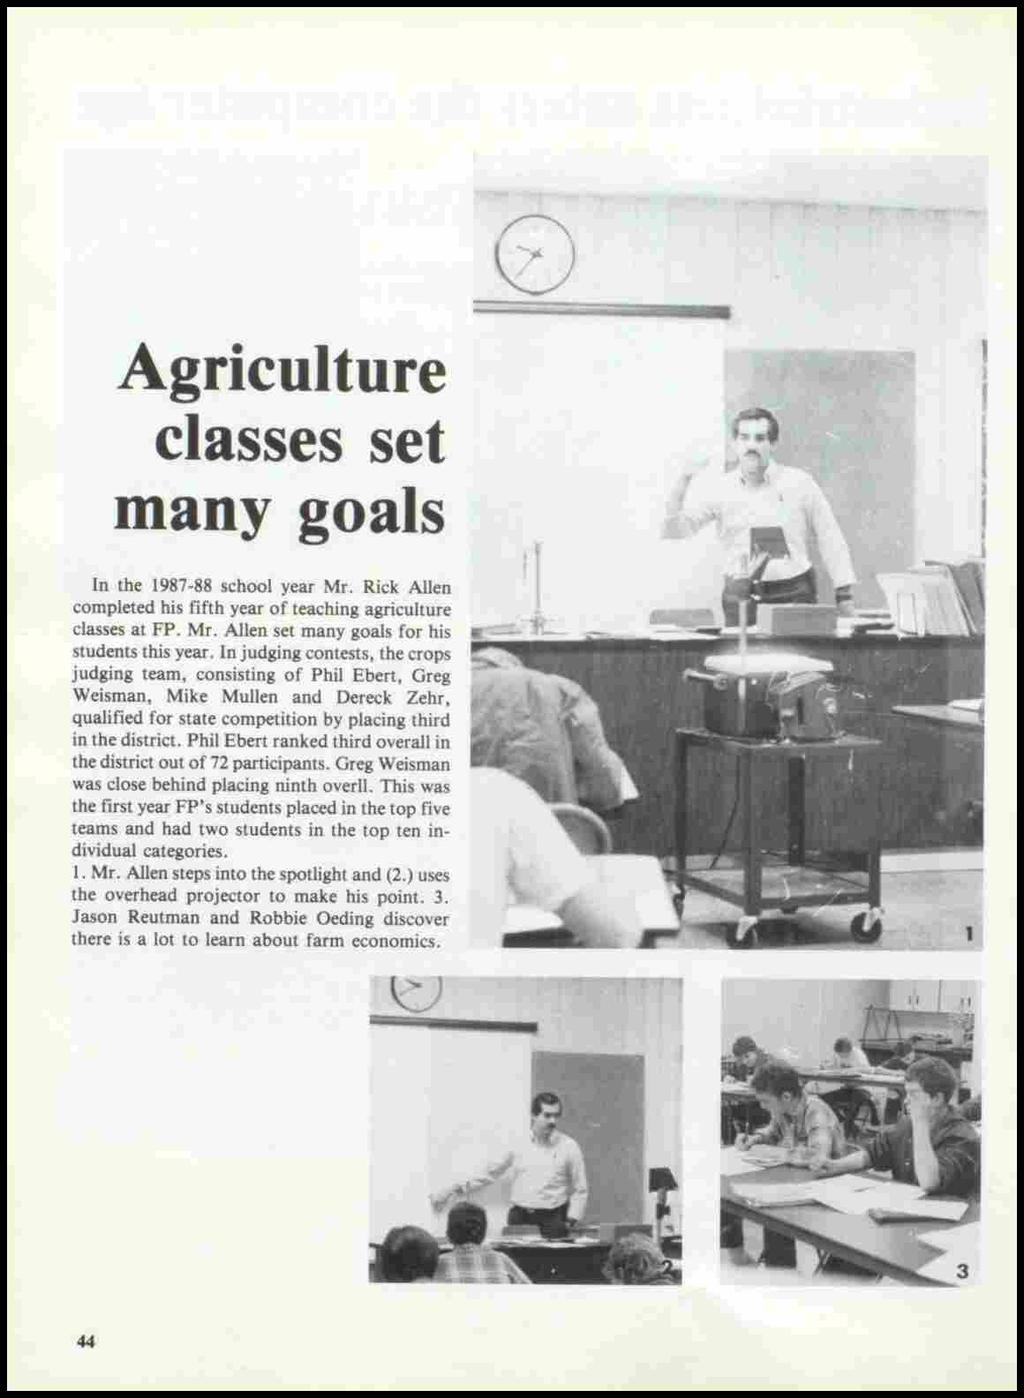 Agriculture classes set many goals In the 1987-88 school year Mr. Rick Allen completed his fifth year of teaching agriculture classes at FP. Mr. Allen set many goals for his students this year.